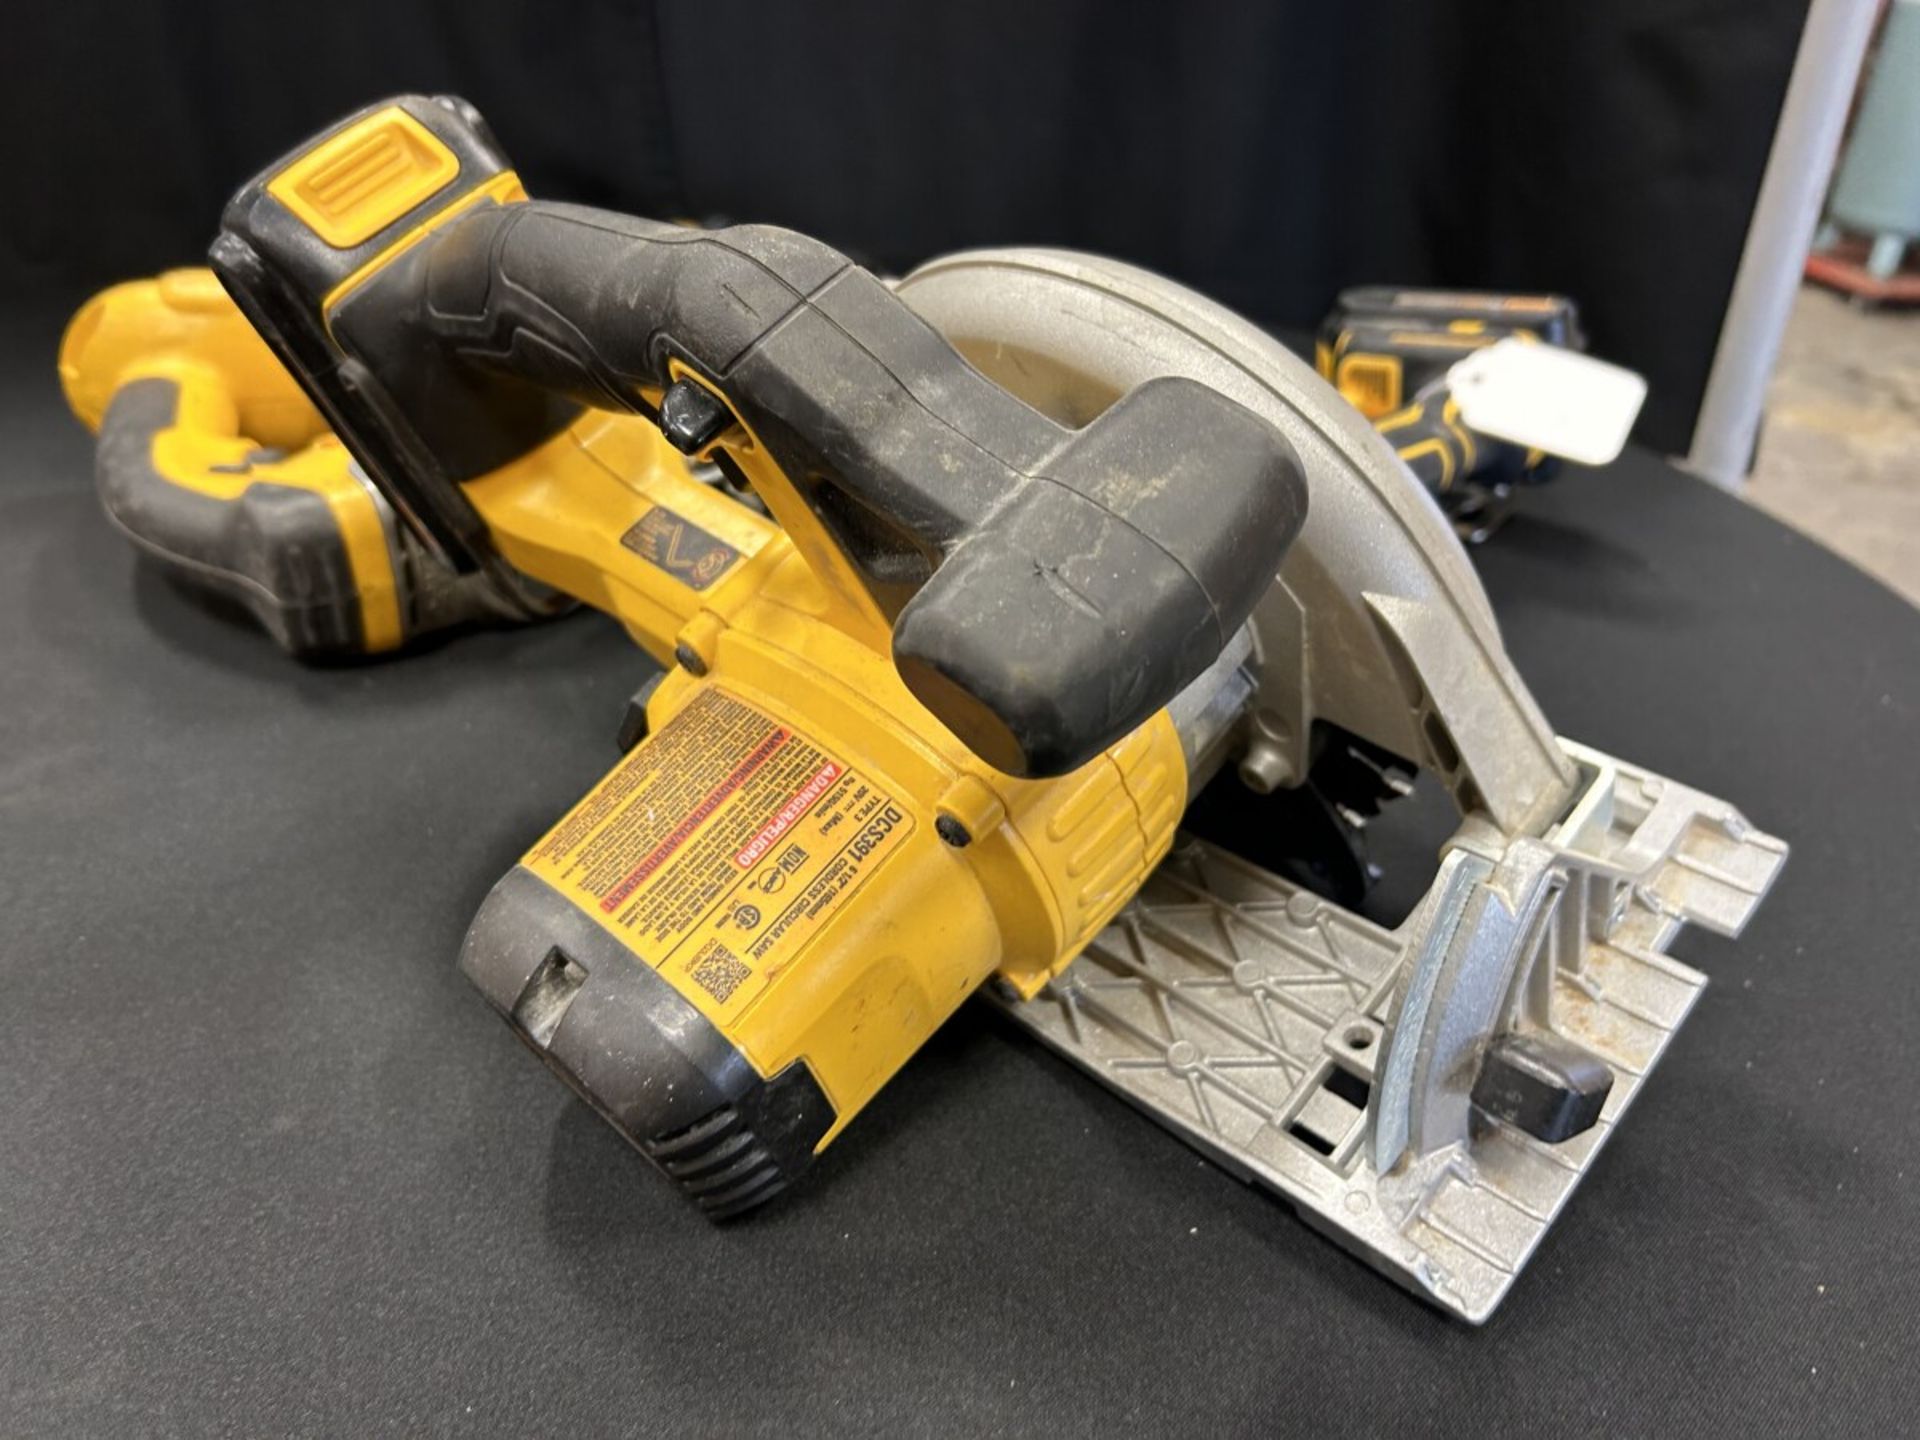 DEWALT CORDLESS JIG SAW, CIRCULAR SAW, DRILL, 2 BATTERIES AND 2 CHARGERS - B40 - Image 4 of 14